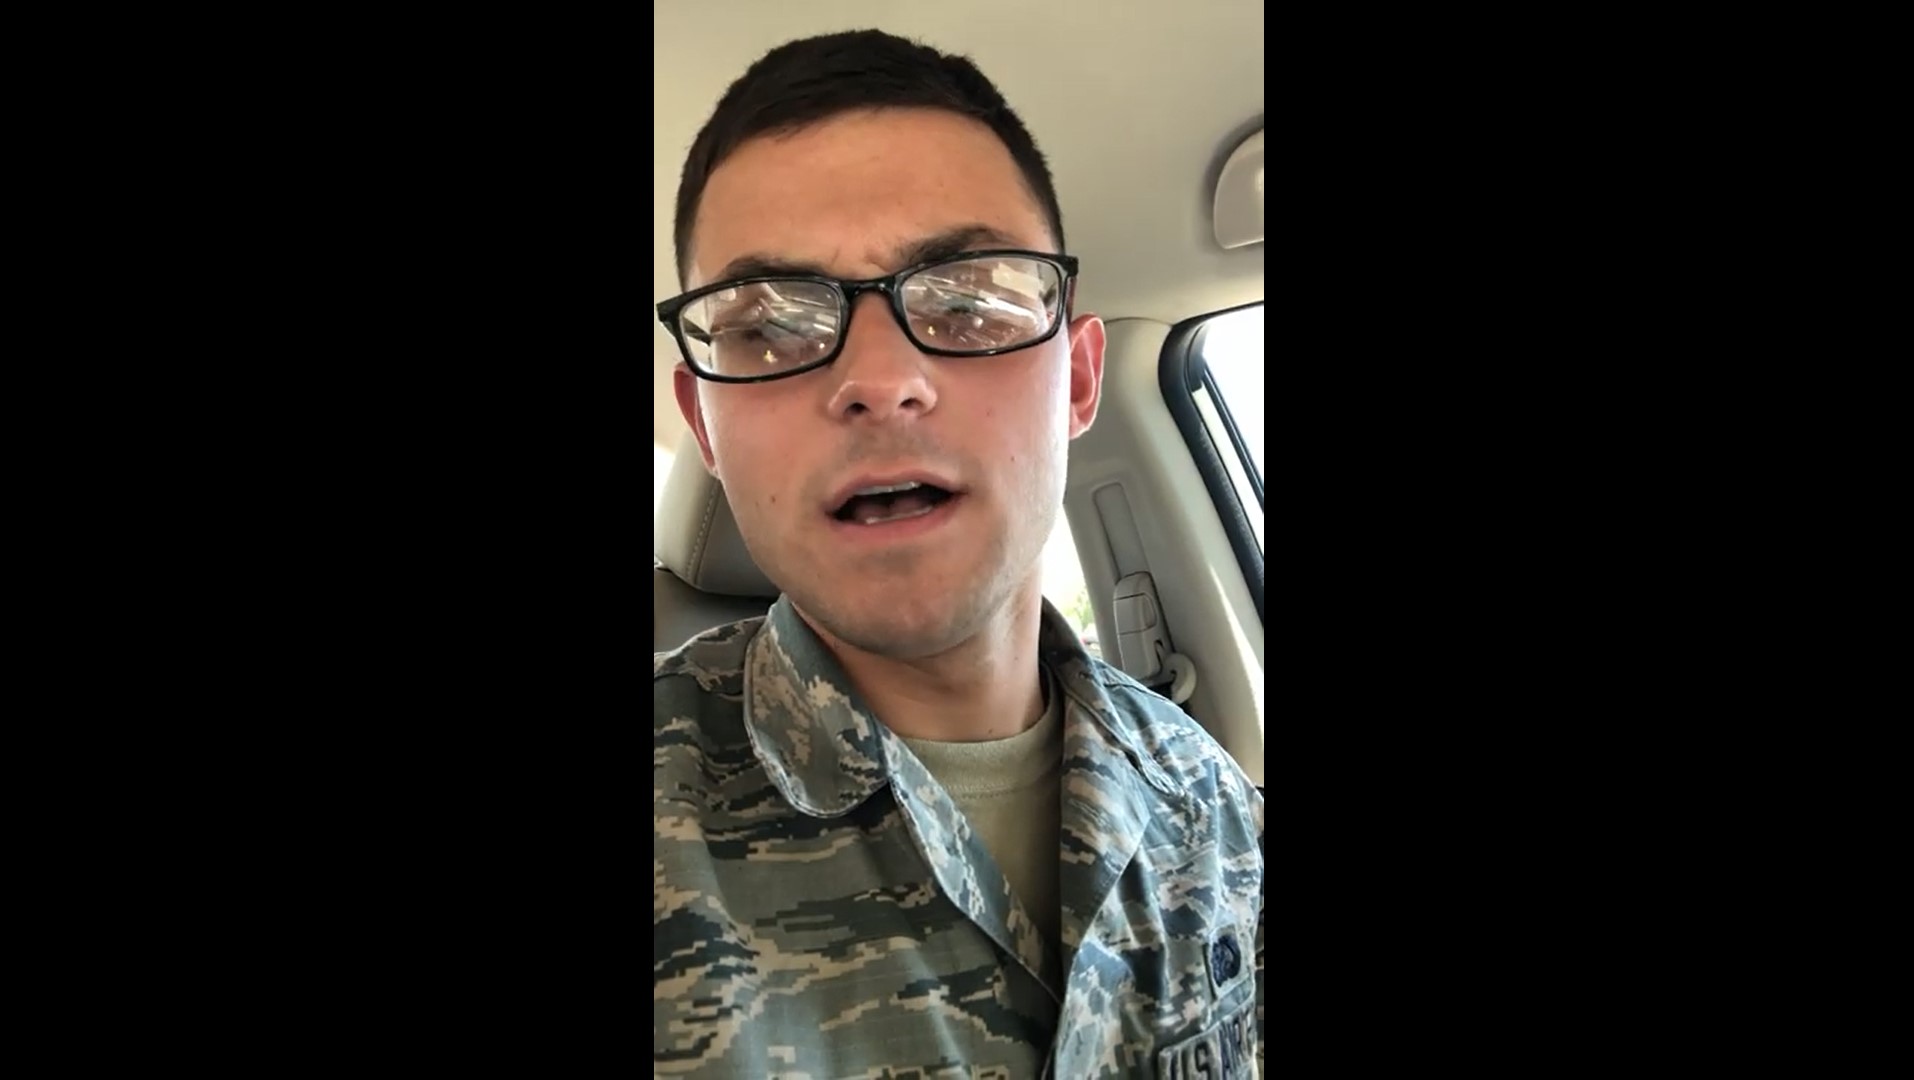 Xxx Man Force Hot Videos - Air Force investigating homophobic videos from airman in uniform